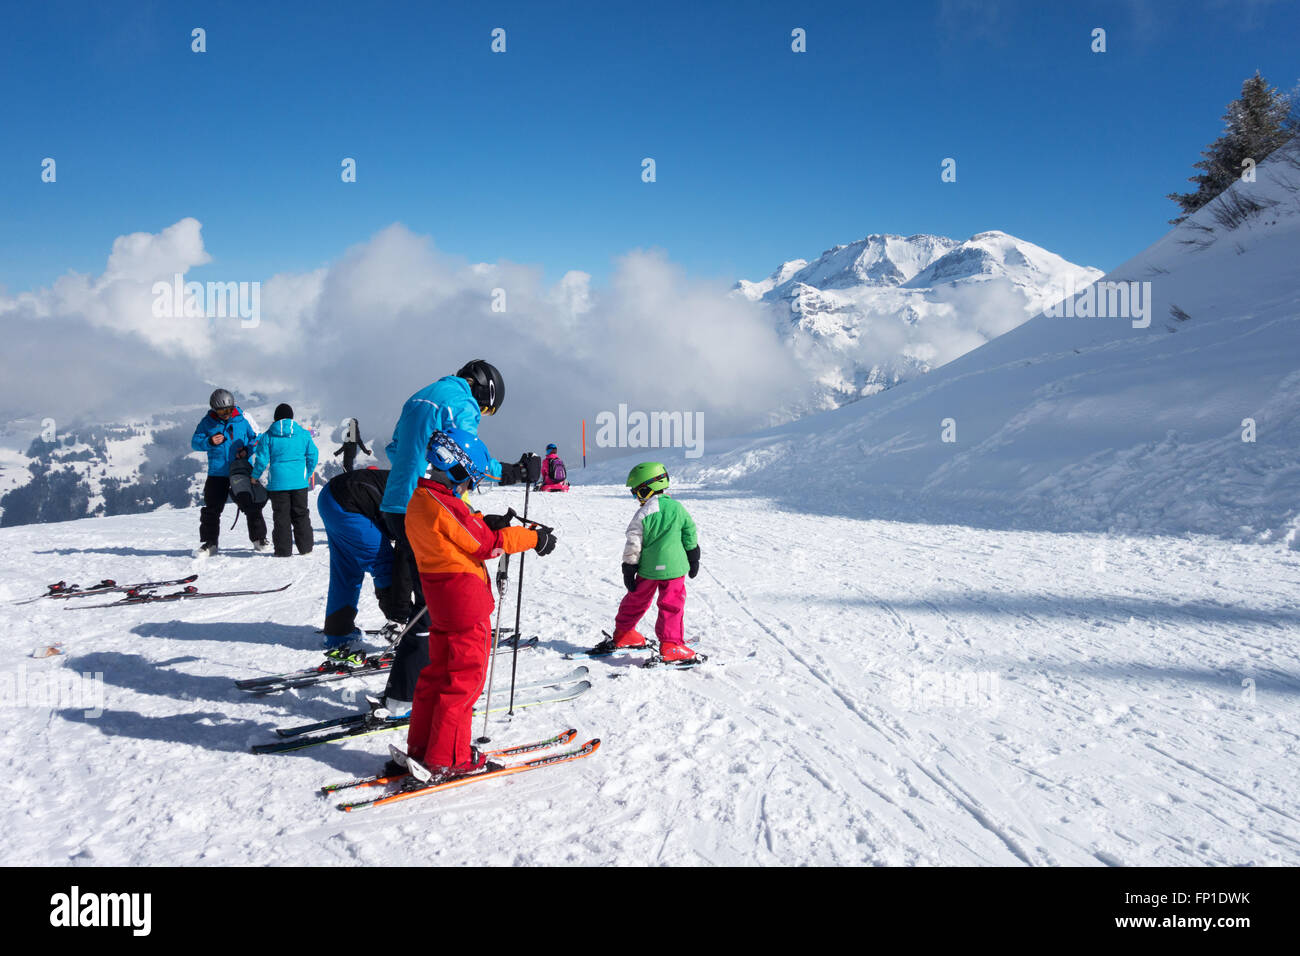 A family with children on a skiing holiday in the Swiss Alps, Lenk, Canton of Bern, Switzerland Europe Stock Photo